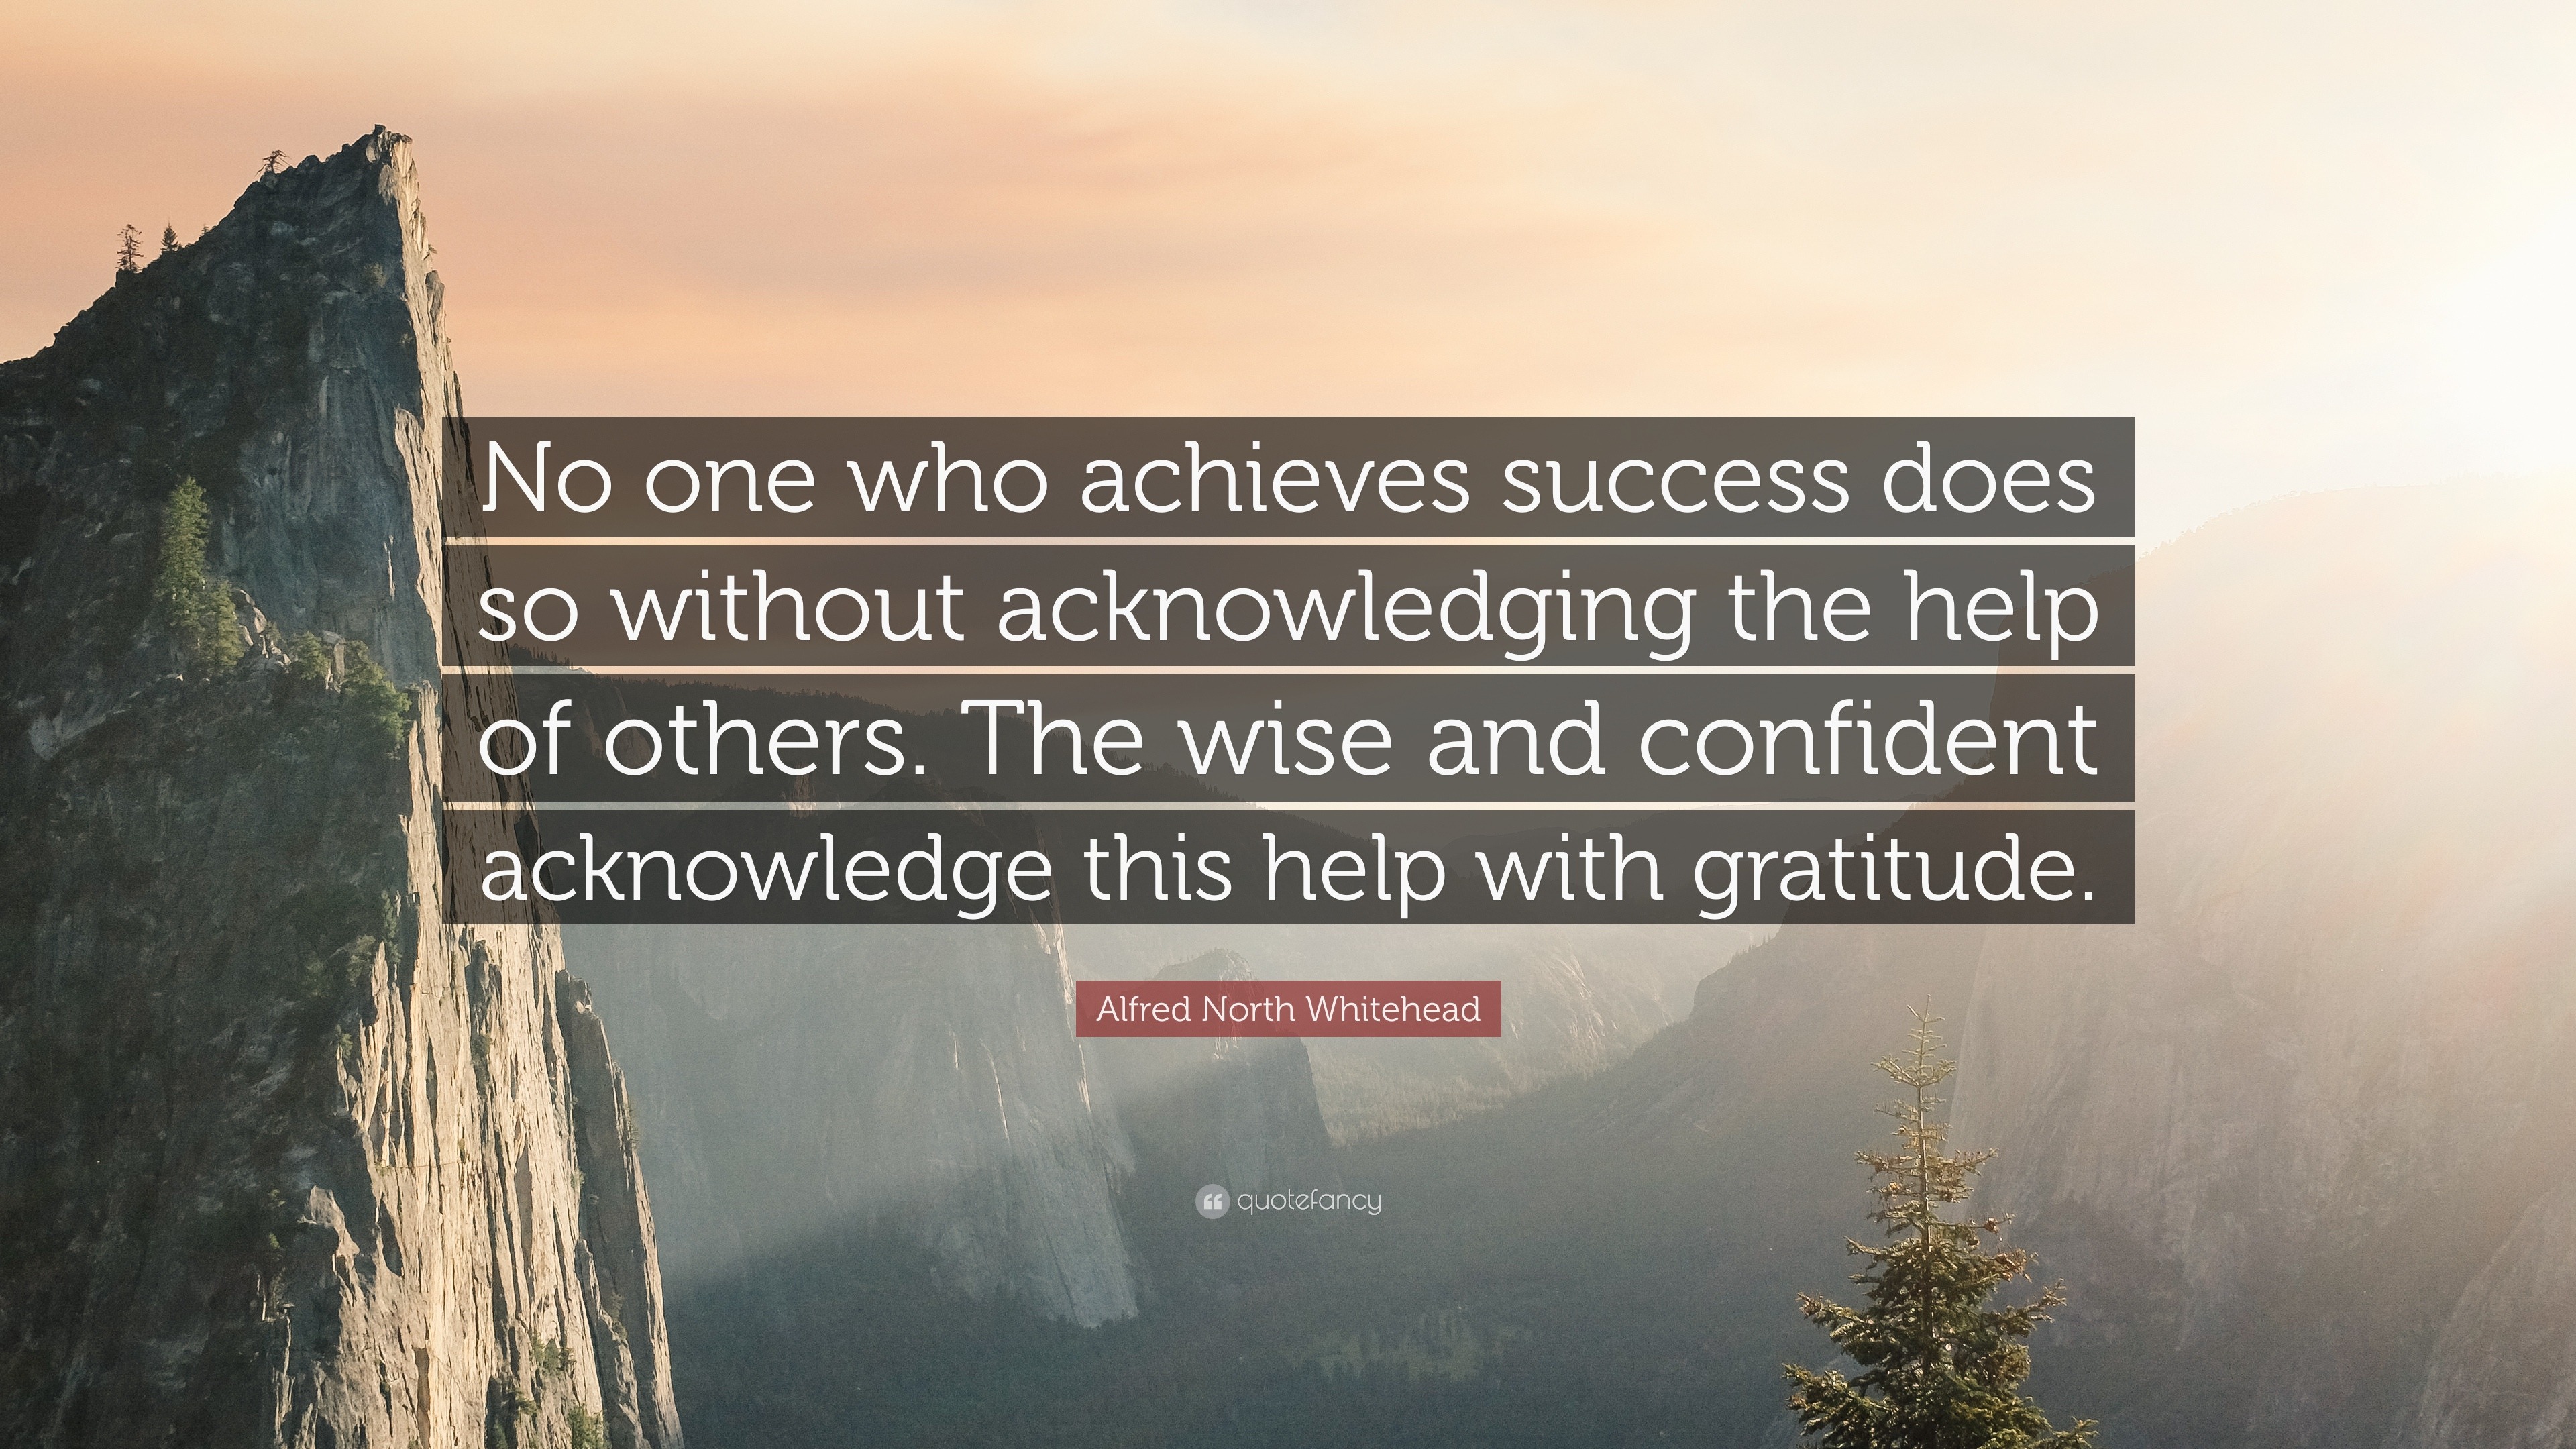 Alfred North Whitehead Quote: “No one who achieves success does so without  acknowledging the help of others. The wise and confident acknowledge this  he”